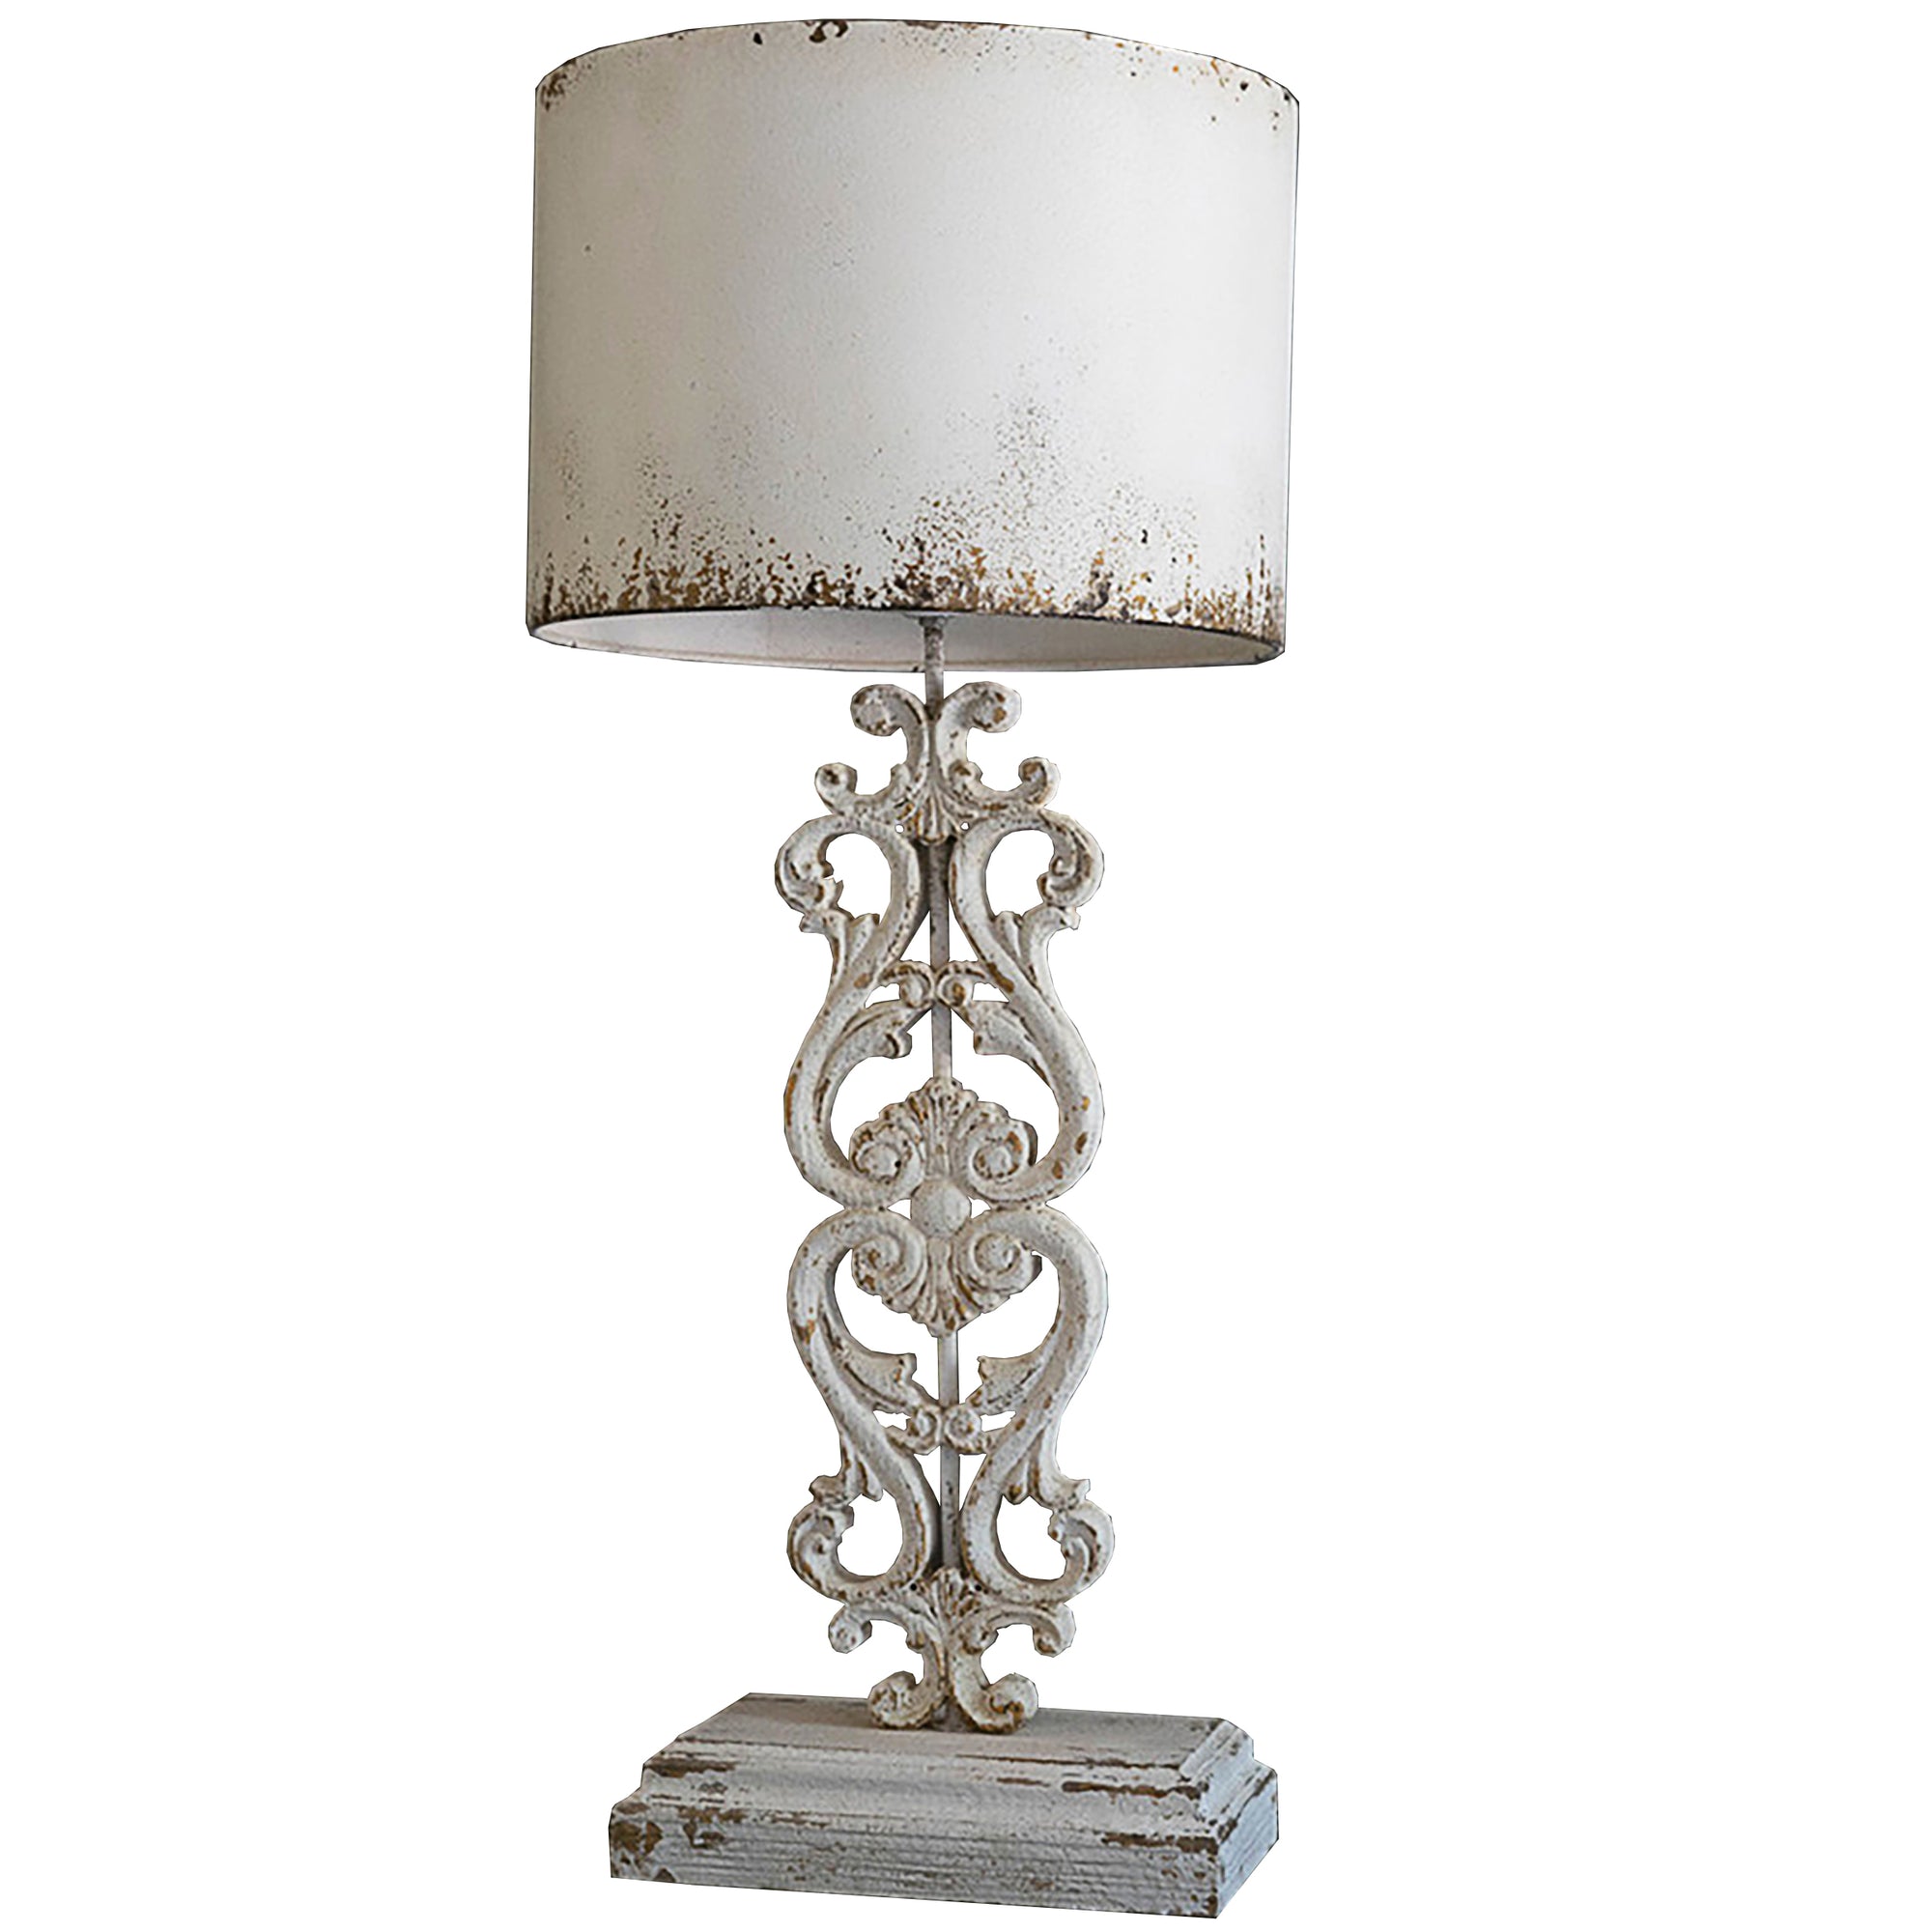 Antique White Rustic Metal Cottagecore Table Lamp With Carved Damask Base